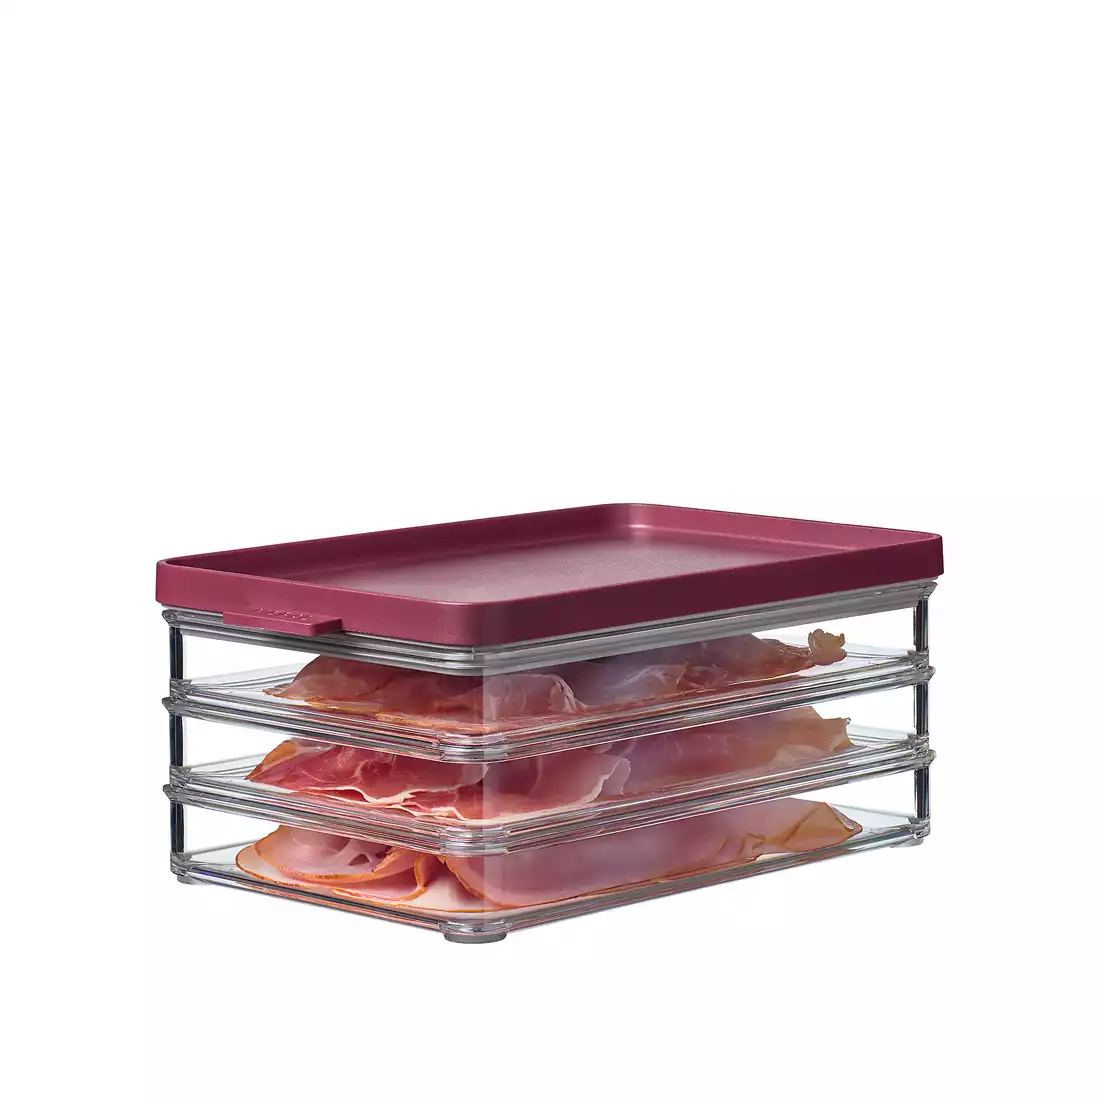 MEPAL OMNIA cold cuts container 500/3, nordic berry